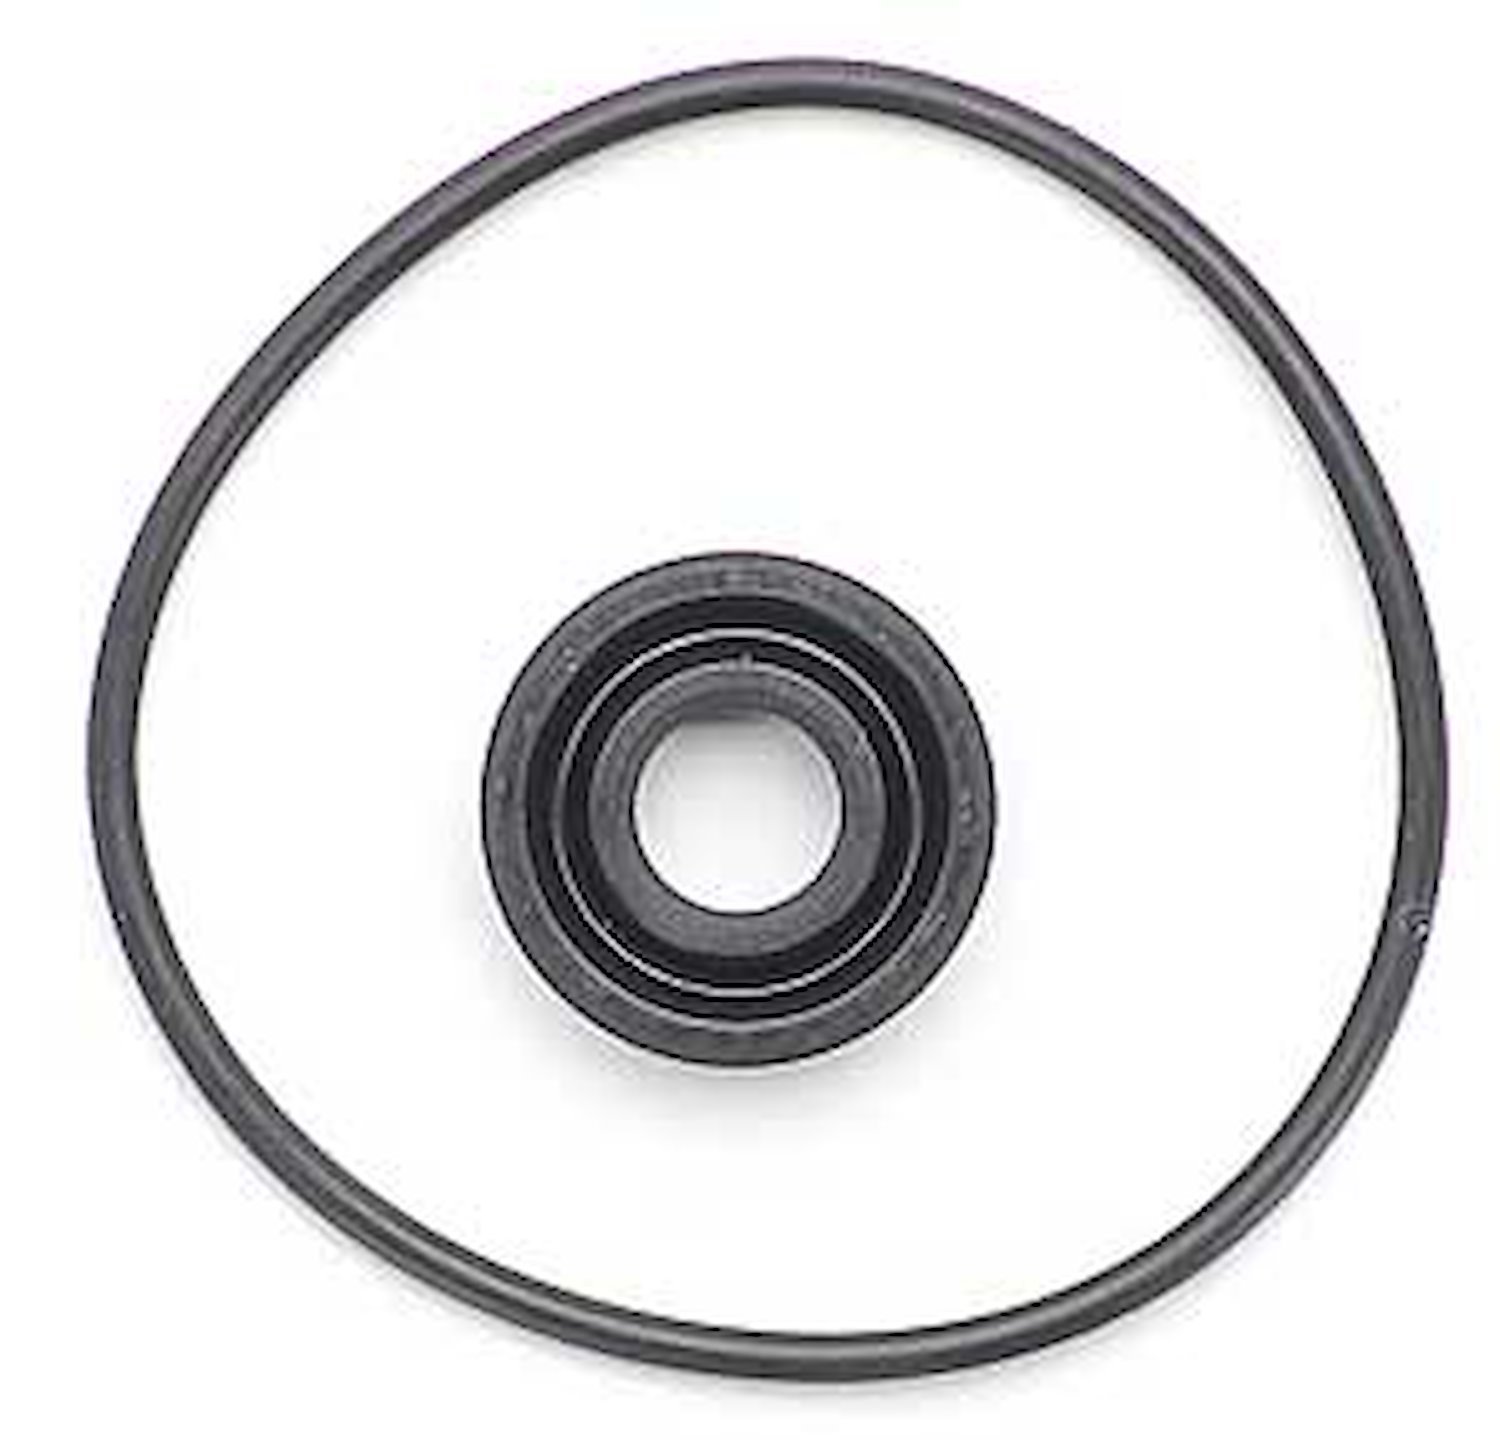 MP-4601-SK Fuel Pump Seal Kit for 4601